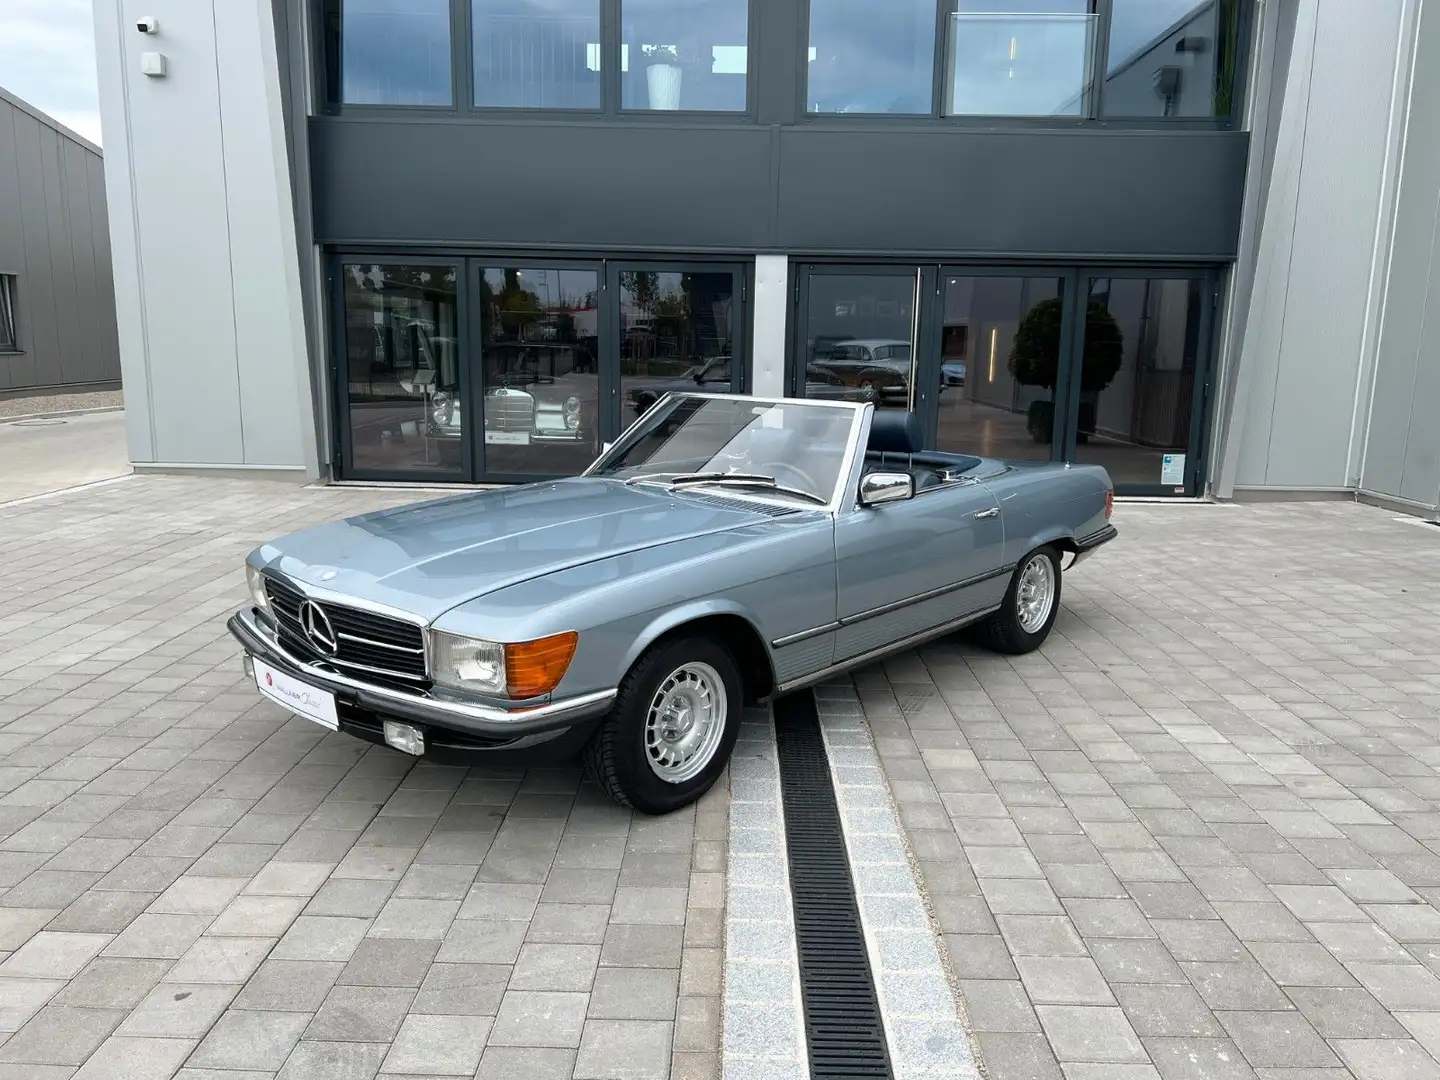 Mercedes-Benz 280 SL*R107*Matching Numbers & Colors - 2